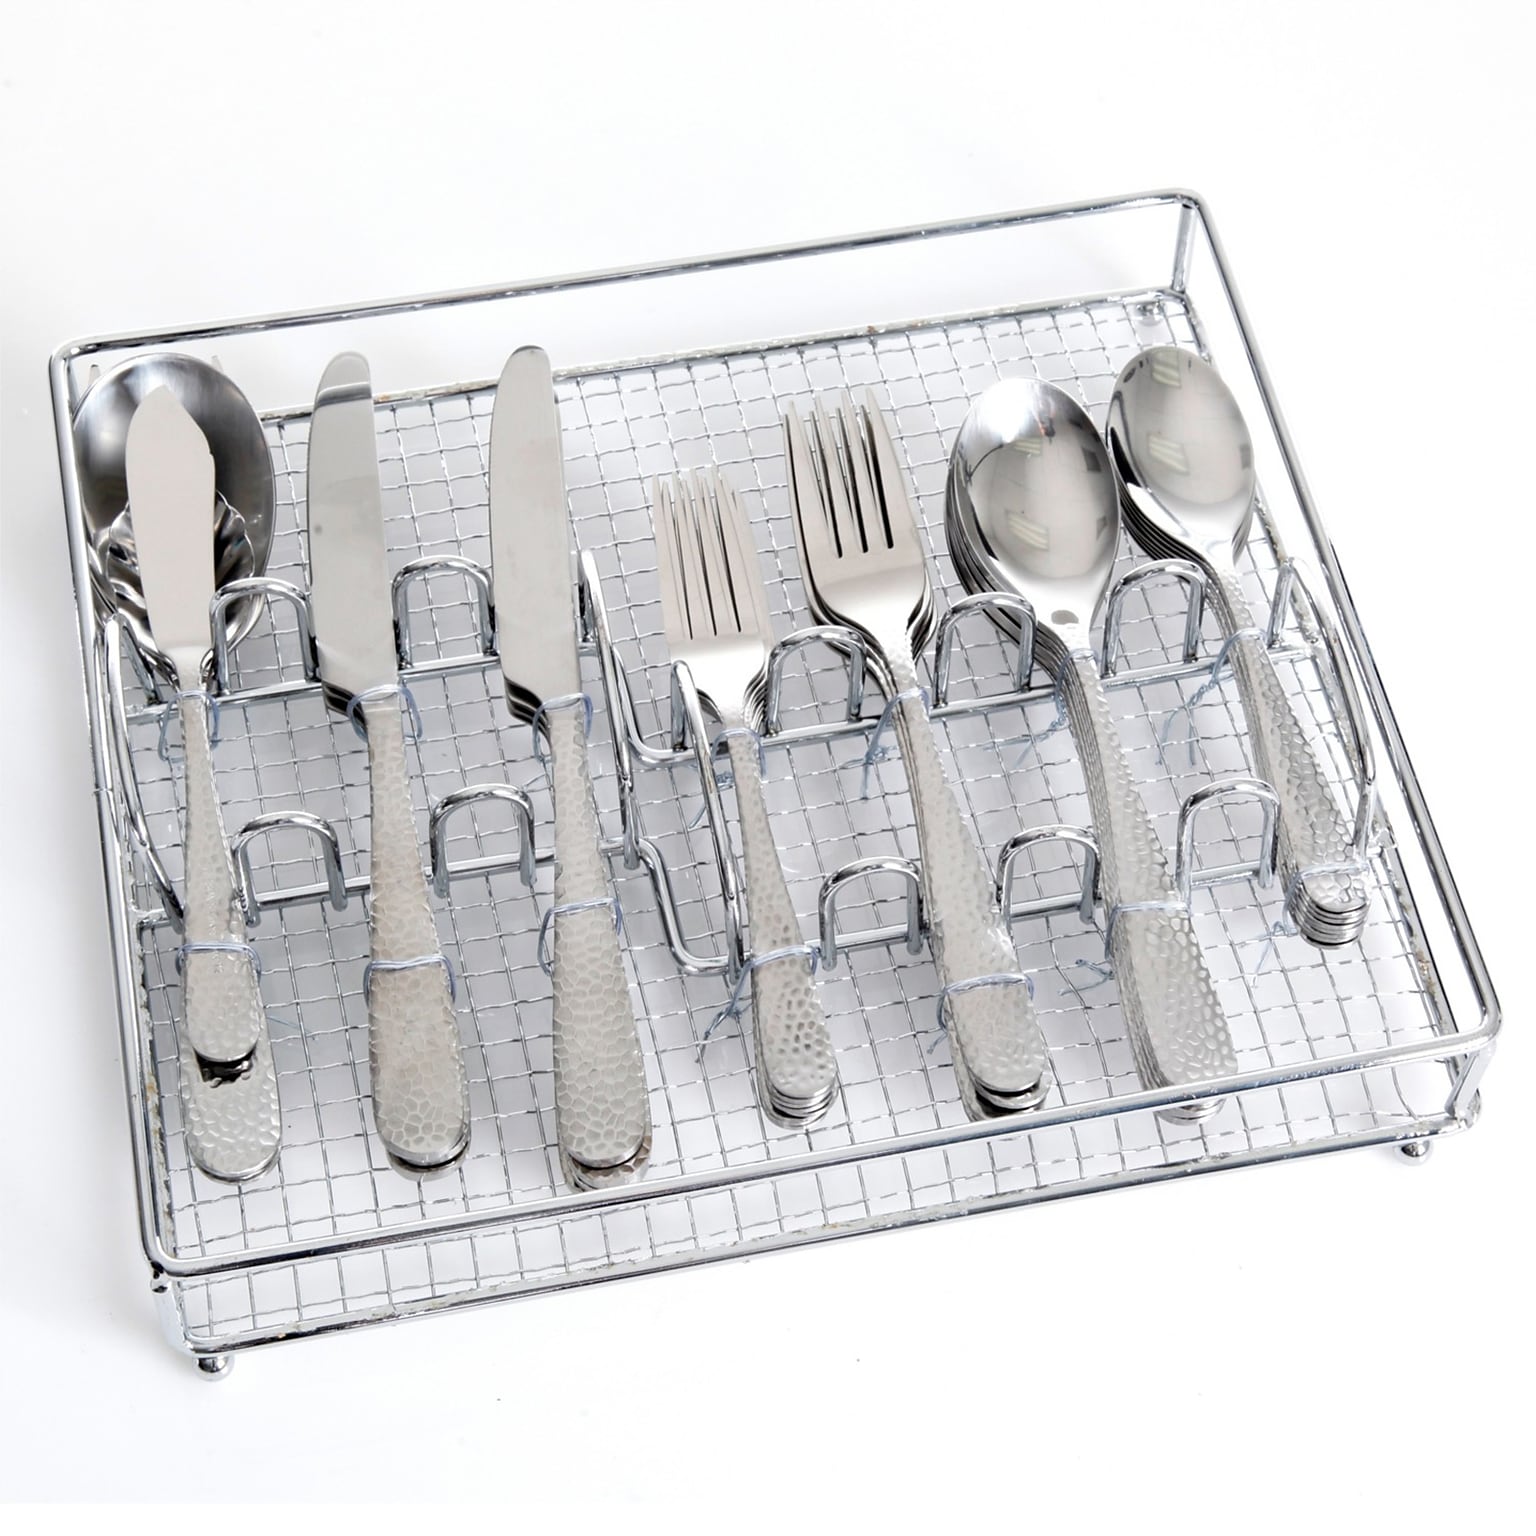 Gibson Home 109532.46 Hammered Stainless Steel 46-Piece Flatware Set with Wire Caddy